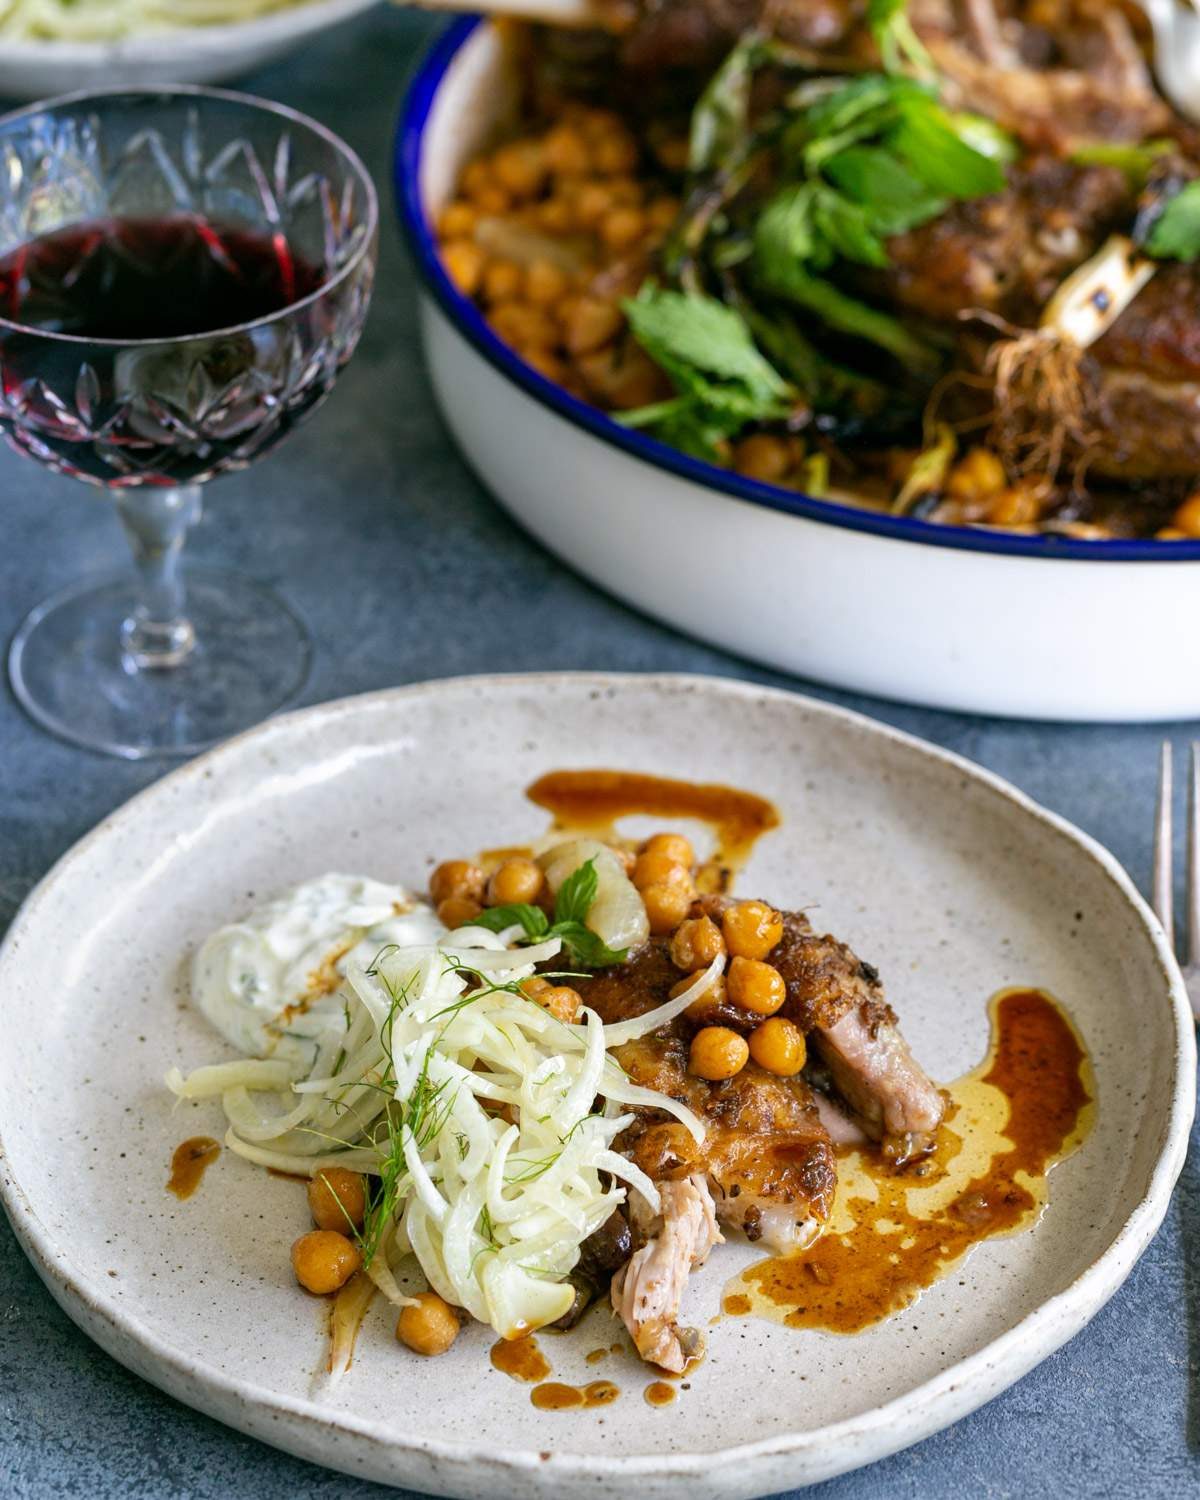 Lamb shoulder served in a plate with chickpeas and fennel salad